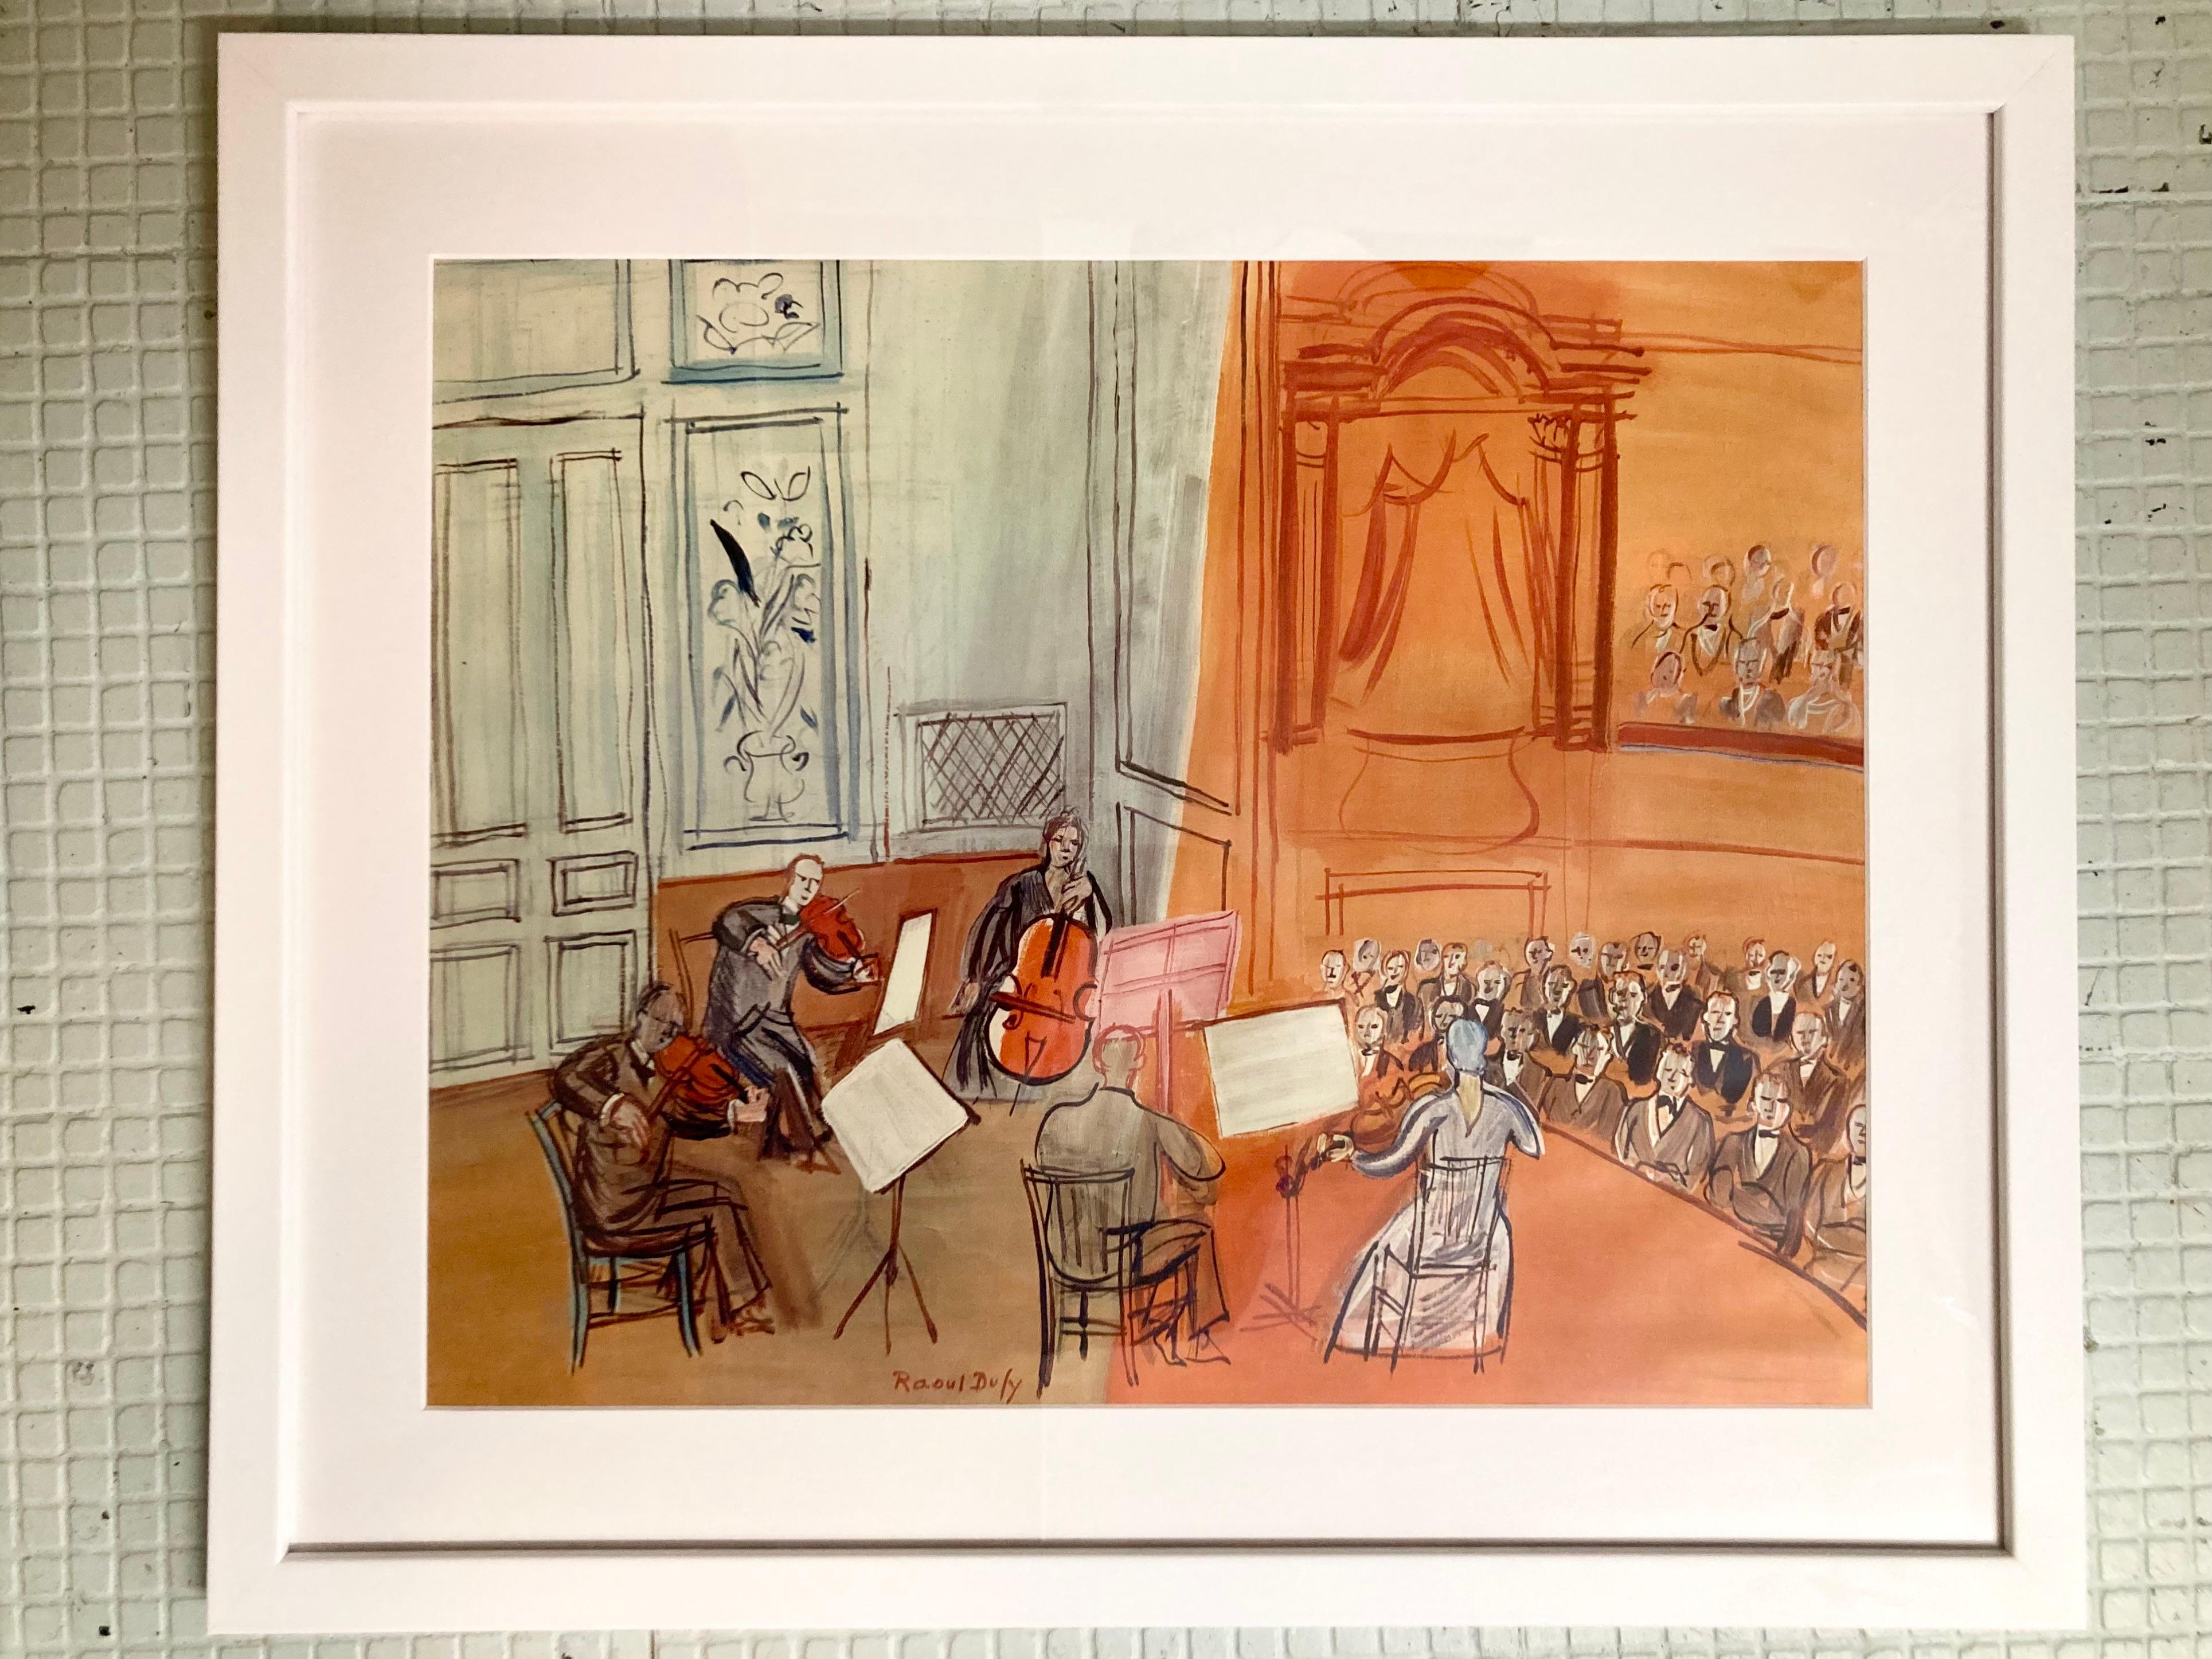 Beautiful Raoul Dufy concert art lithograph obtained from the estate of Tony Duquette. Great addition to your French inspired interiors.

Art dimensions: 21.5